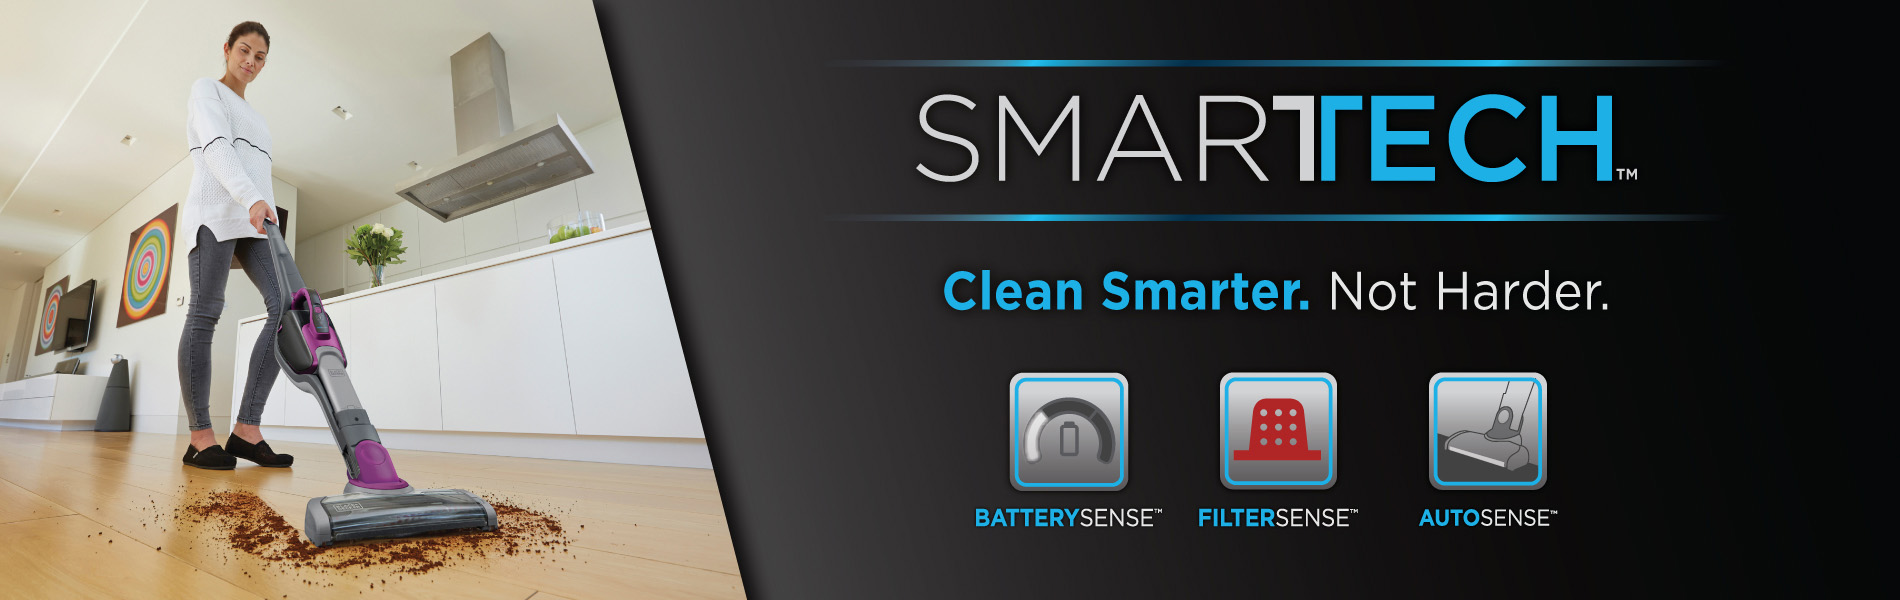 BLACK+DECKER™ Announces New Lithium Ion Vacuums with SMARTECH